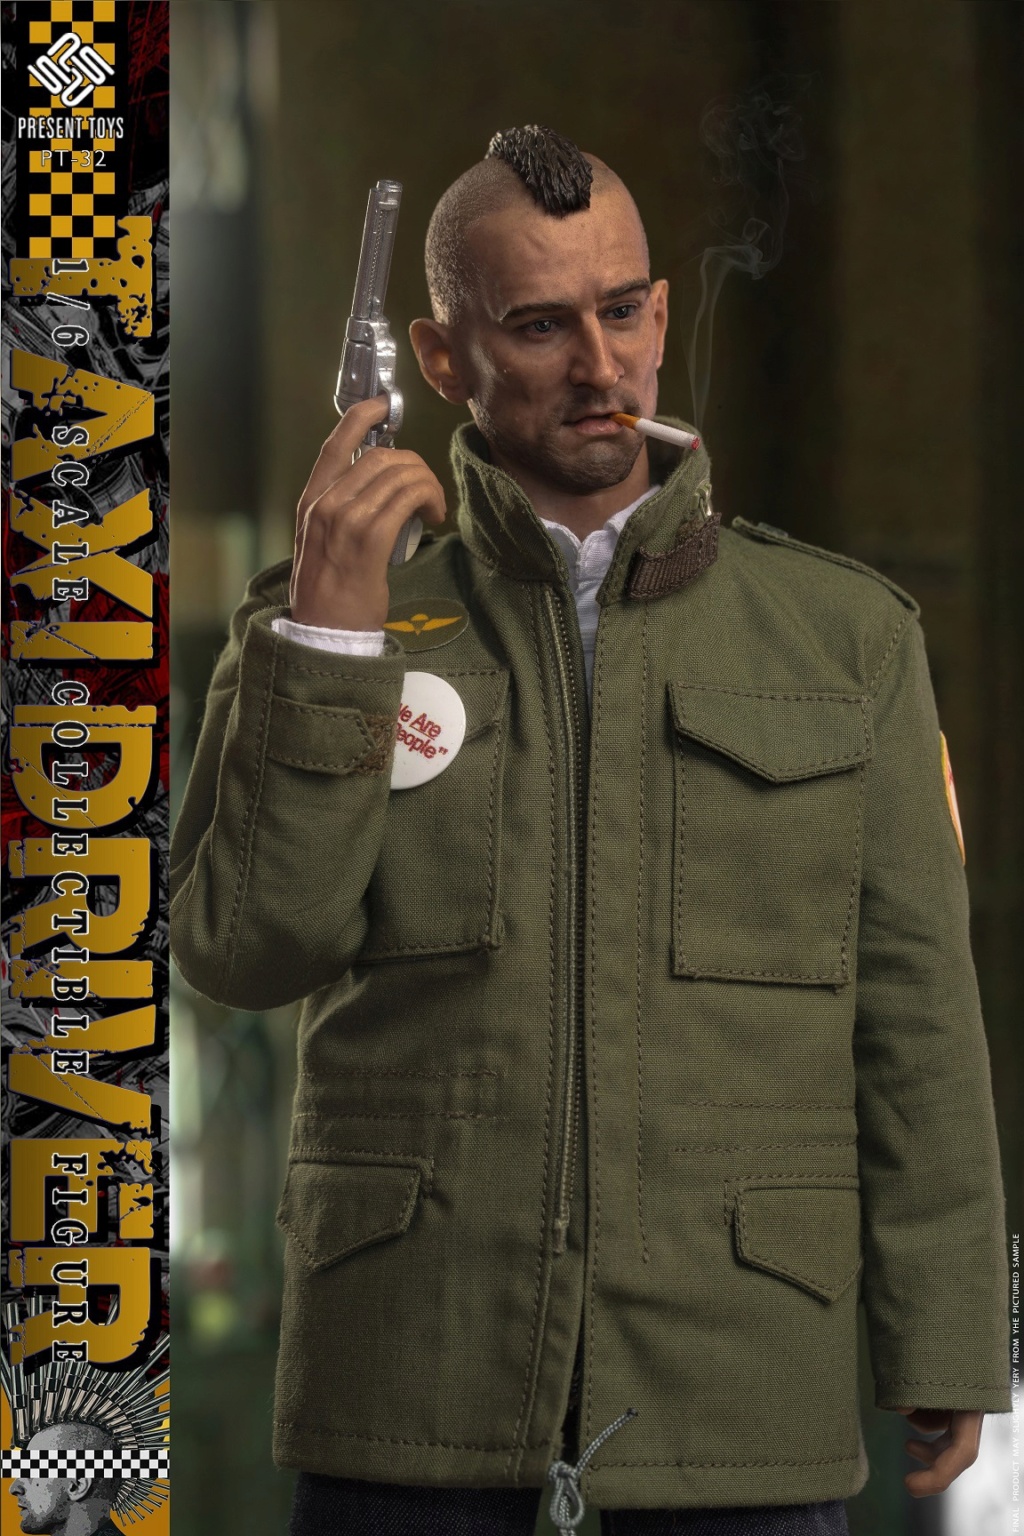 crimedrama - NEW PRODUCT: Present Toys: 1/6 "Taxi Driver" Collection Doll#PT-sp32 18193010